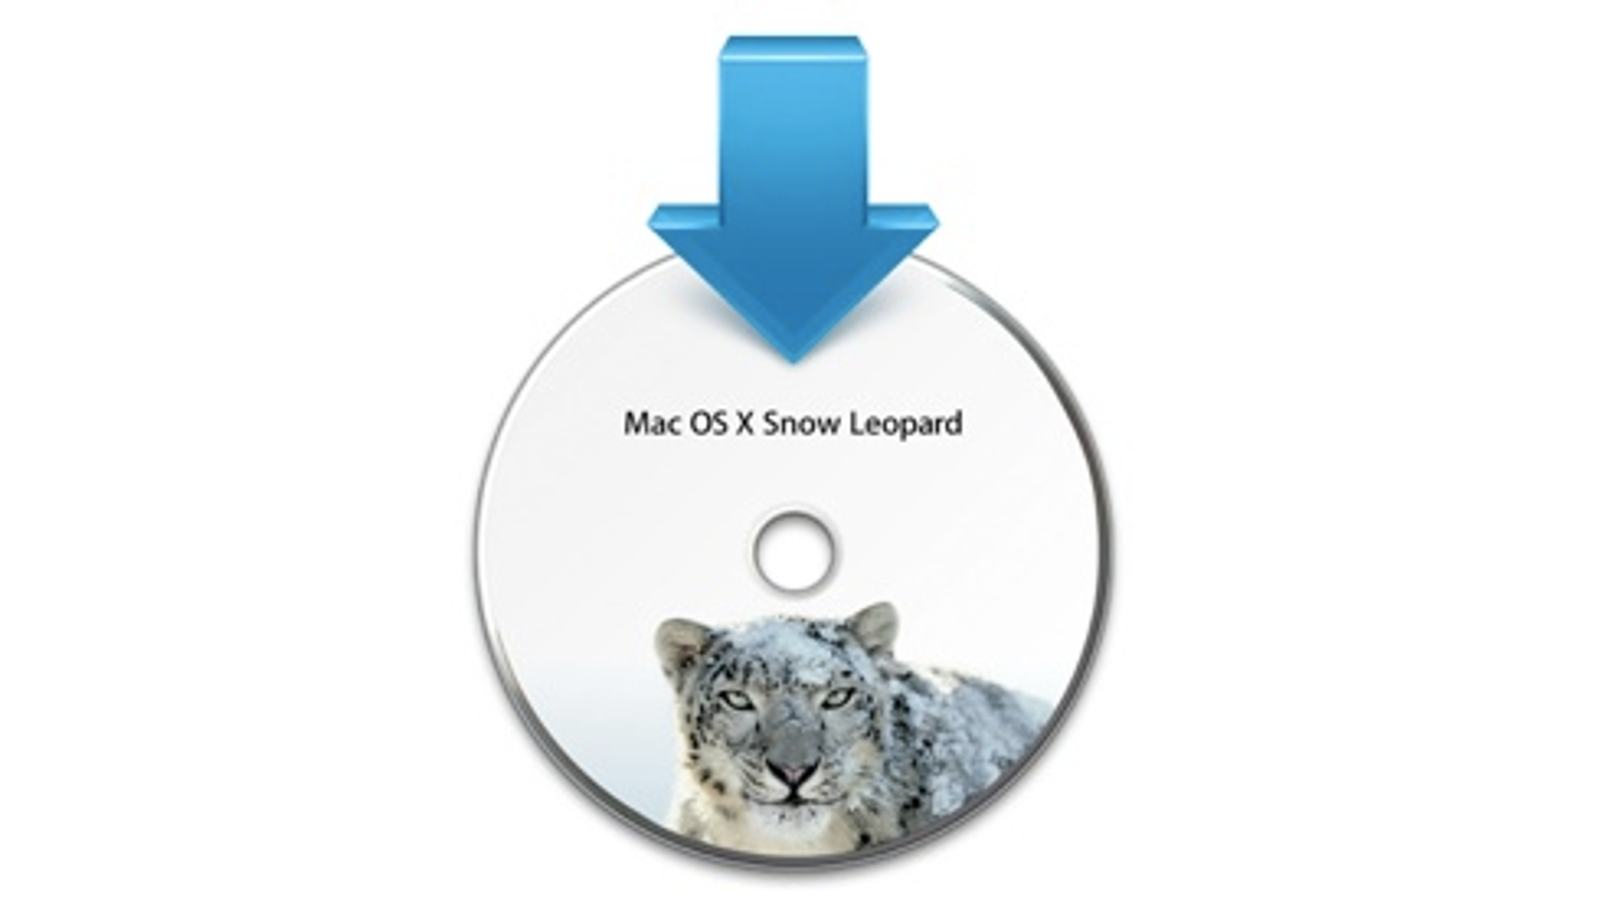 what apps work with apple snow leopard